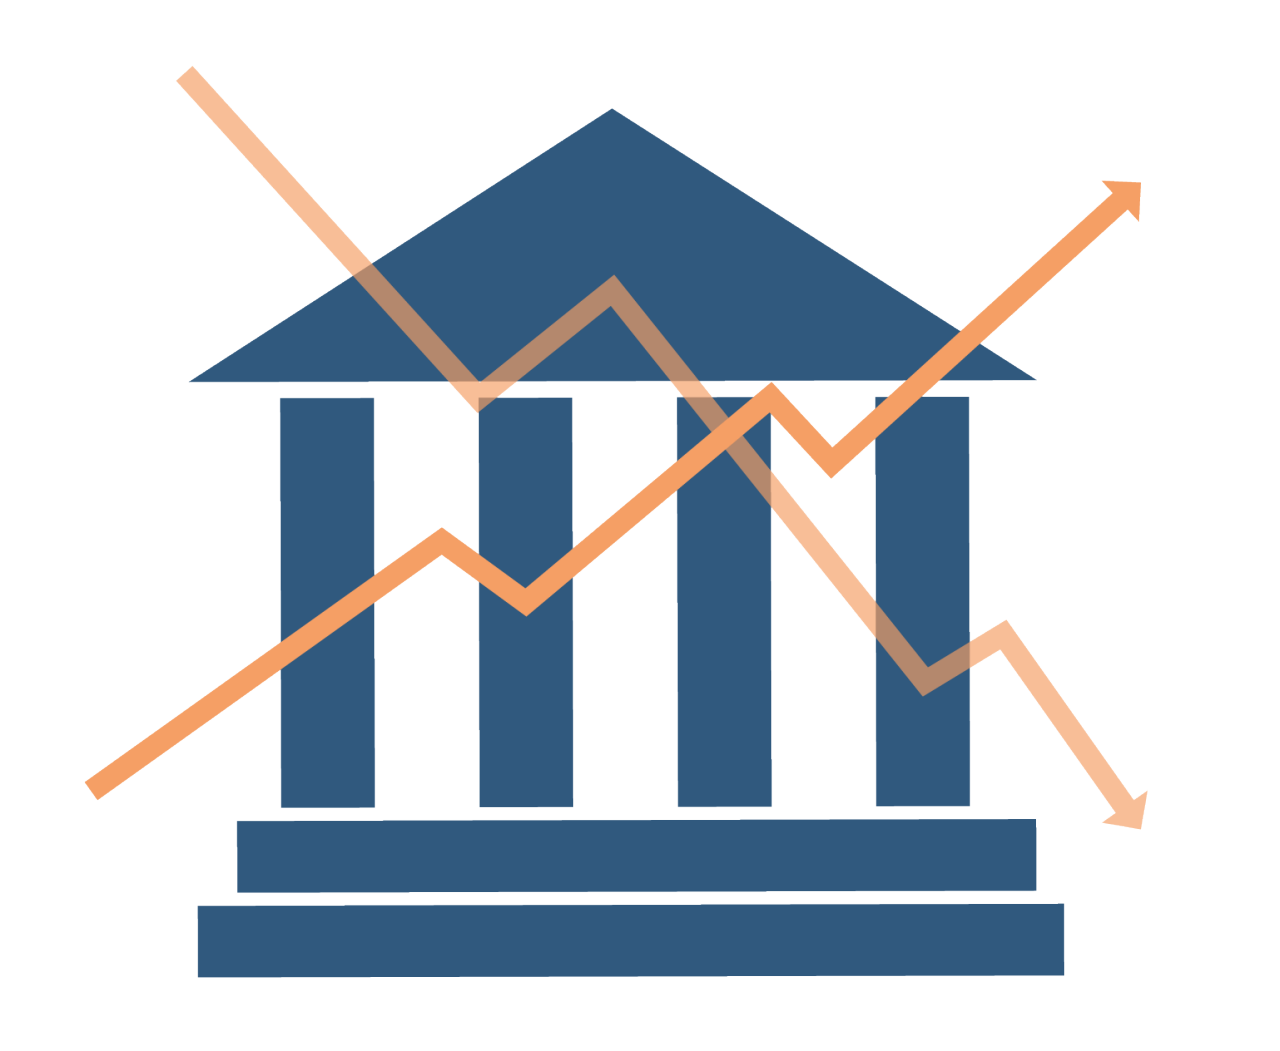 Image shows a blue icon that resembles the Bank of England building. Across the building are two orange lines with rises and dips. One goes from the top left down towards bottom right, the other goes from bottom left up towards top right. At the end of each line is an arrow indicating its direction. The lines represent levels of inflation and that it can rise and fall.